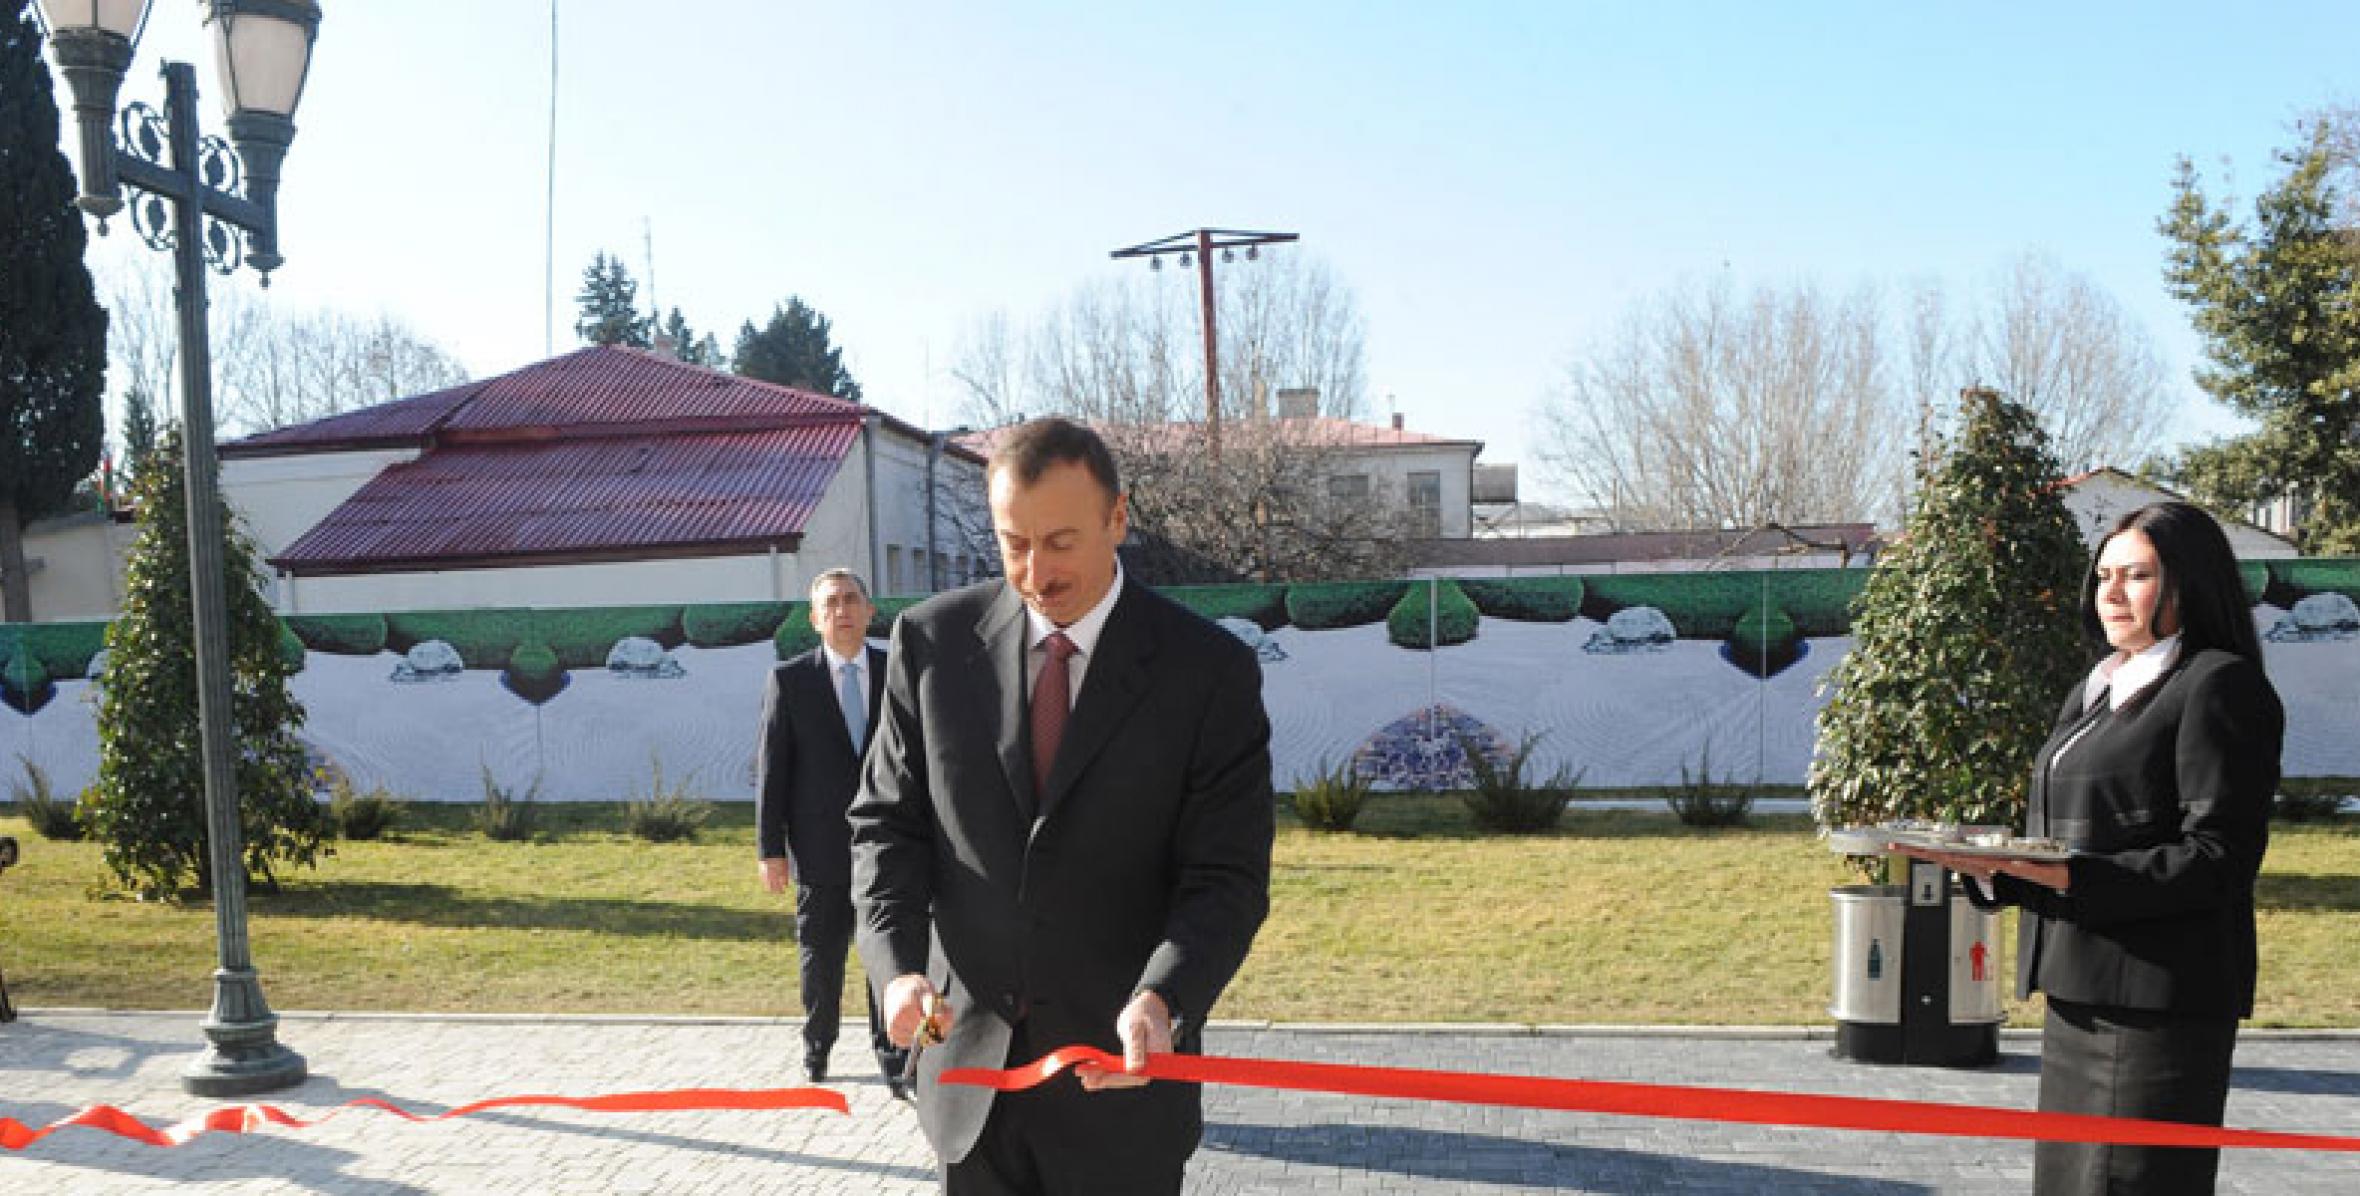 Ilham Aliyev took part in the opening of Ganja Regional Information Center for people with physical disabilities